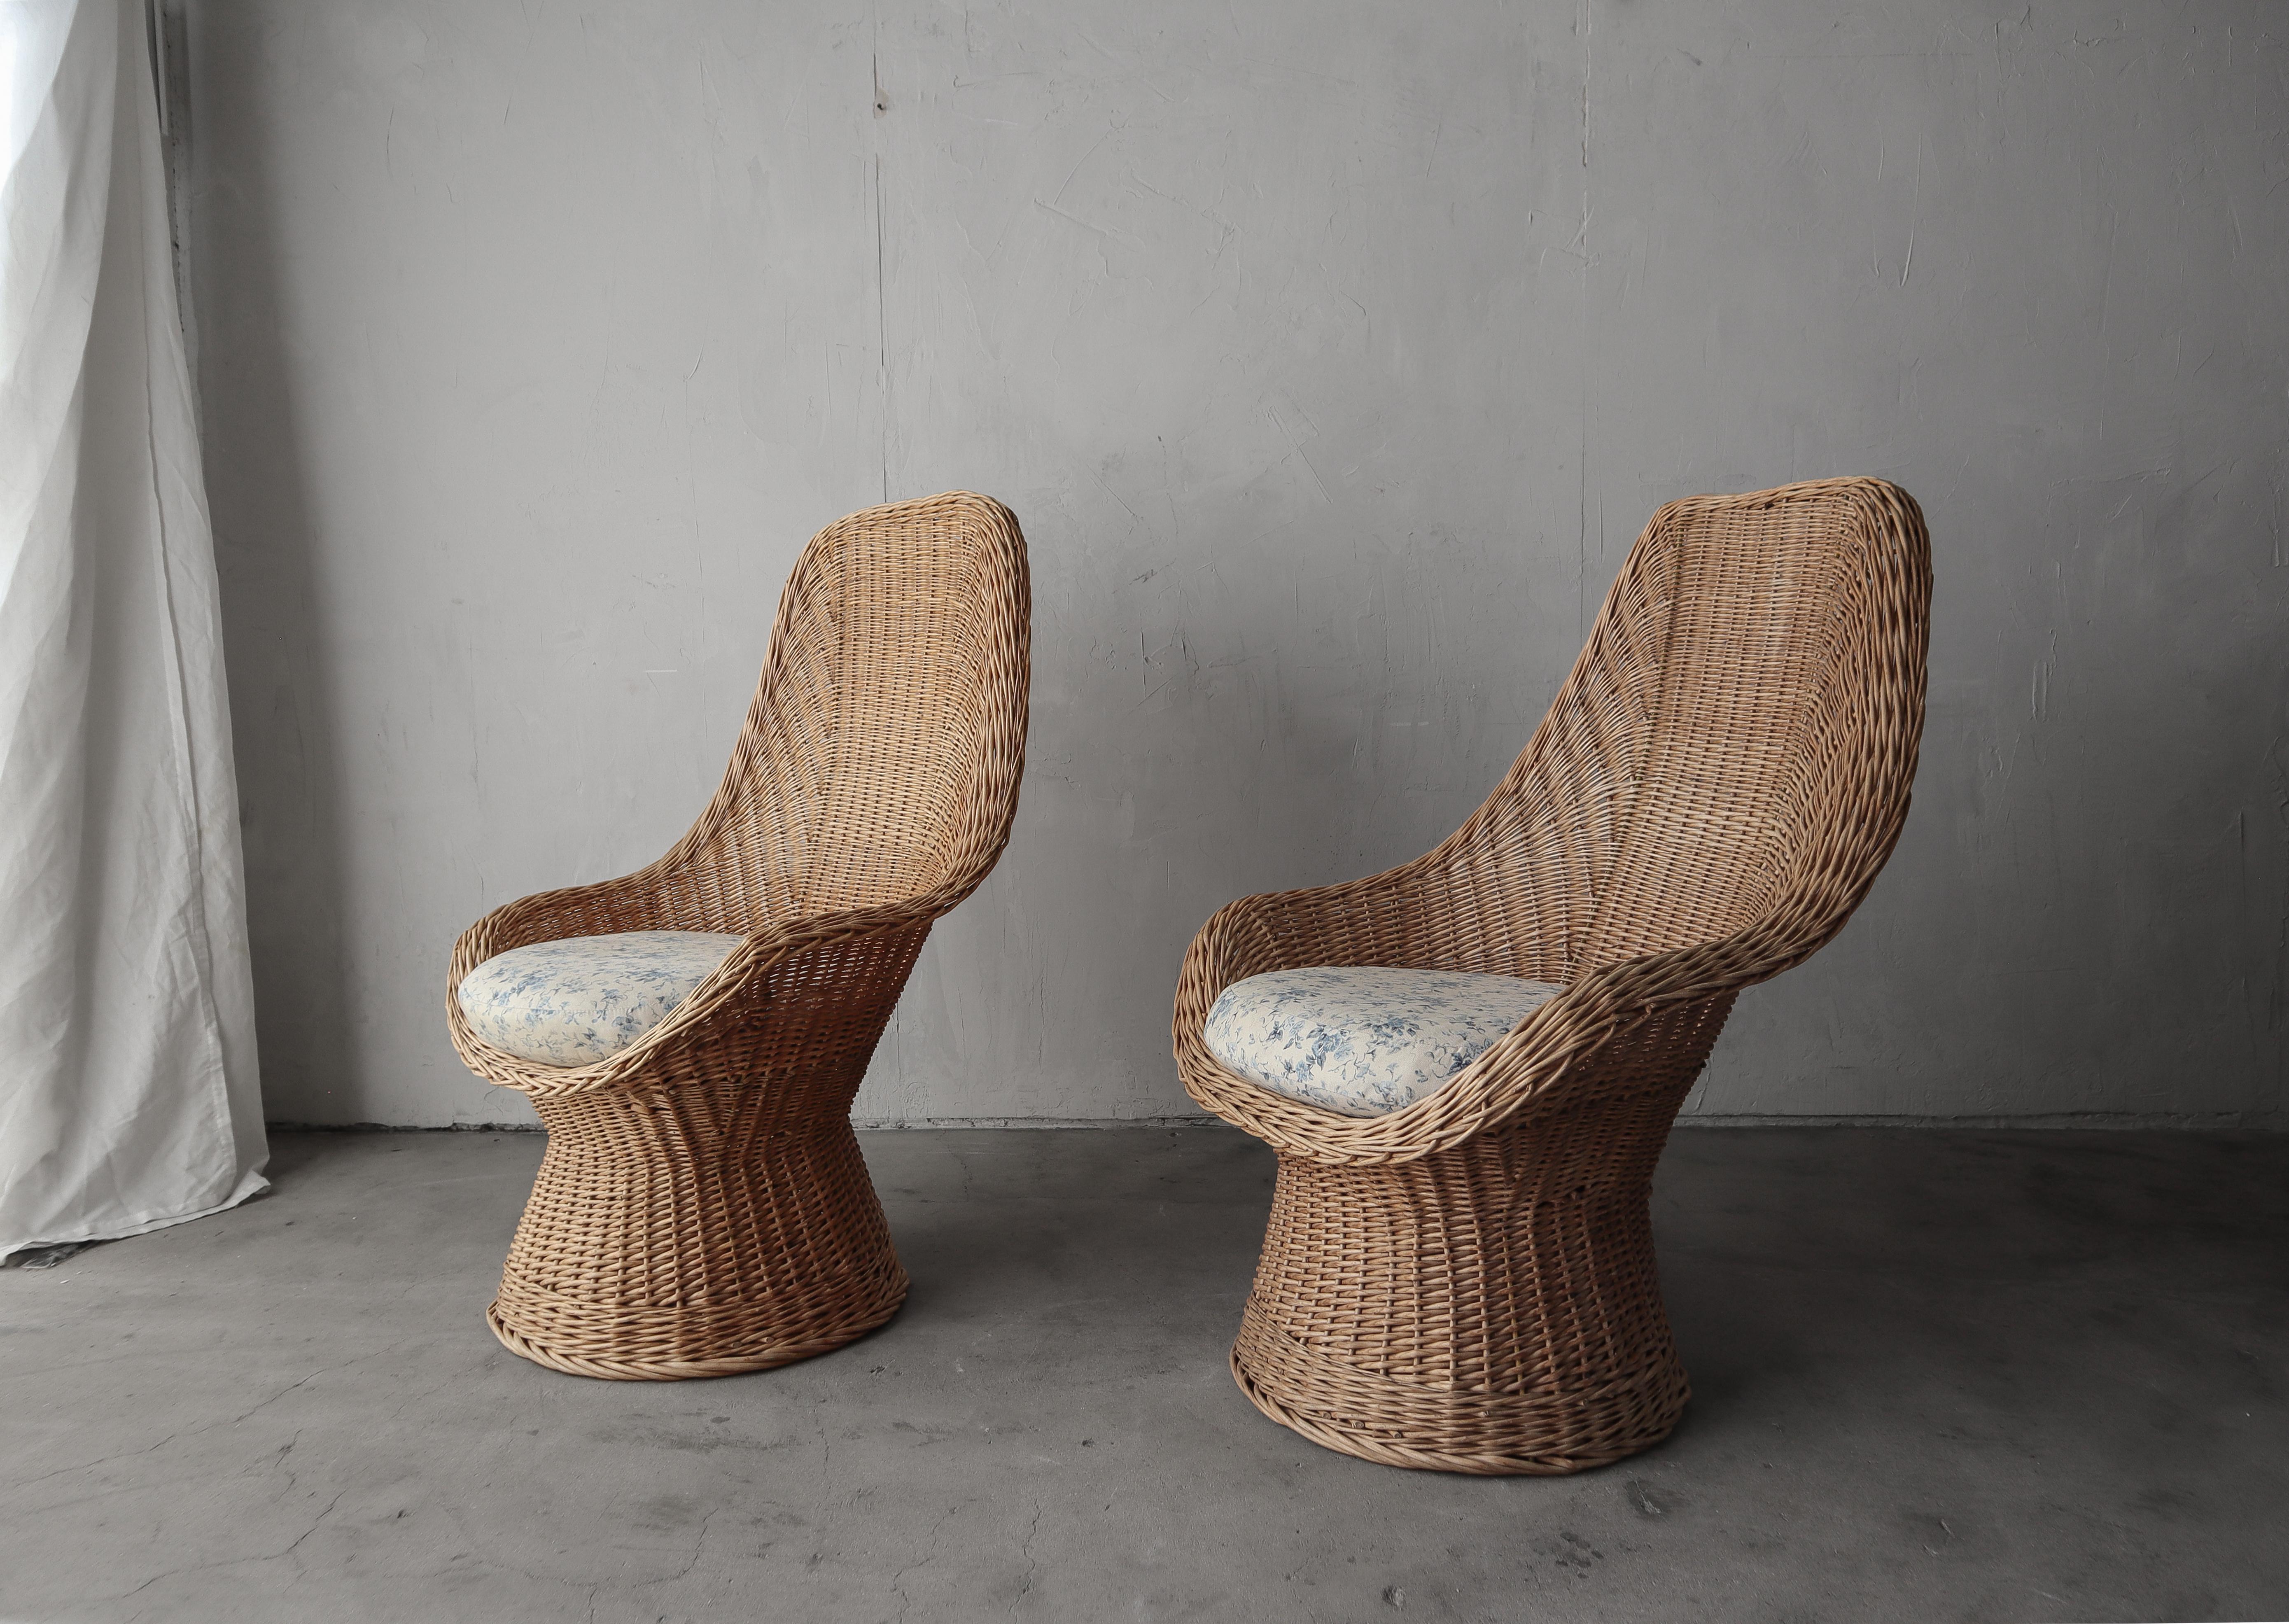 Excellent pair of 1970s, Polish wicker scoop lounge chairs.

Chairs are in excellent vintage condition with no actual damage.  The fabric on the seat cushions is useable but these would be lovely redone.



